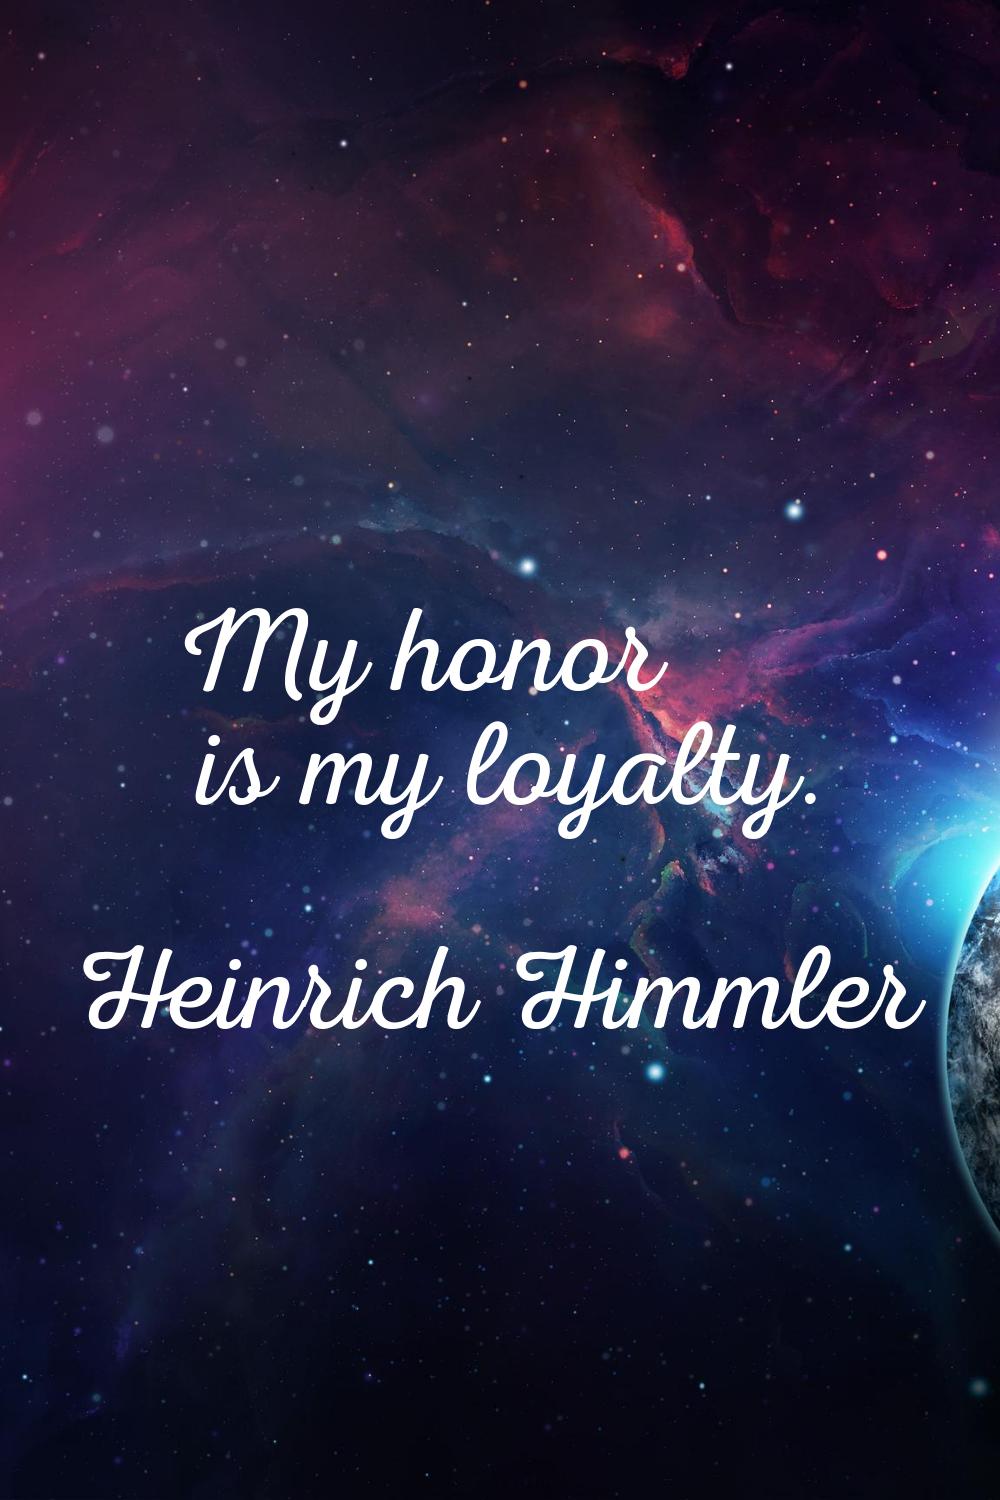 My honor is my loyalty.